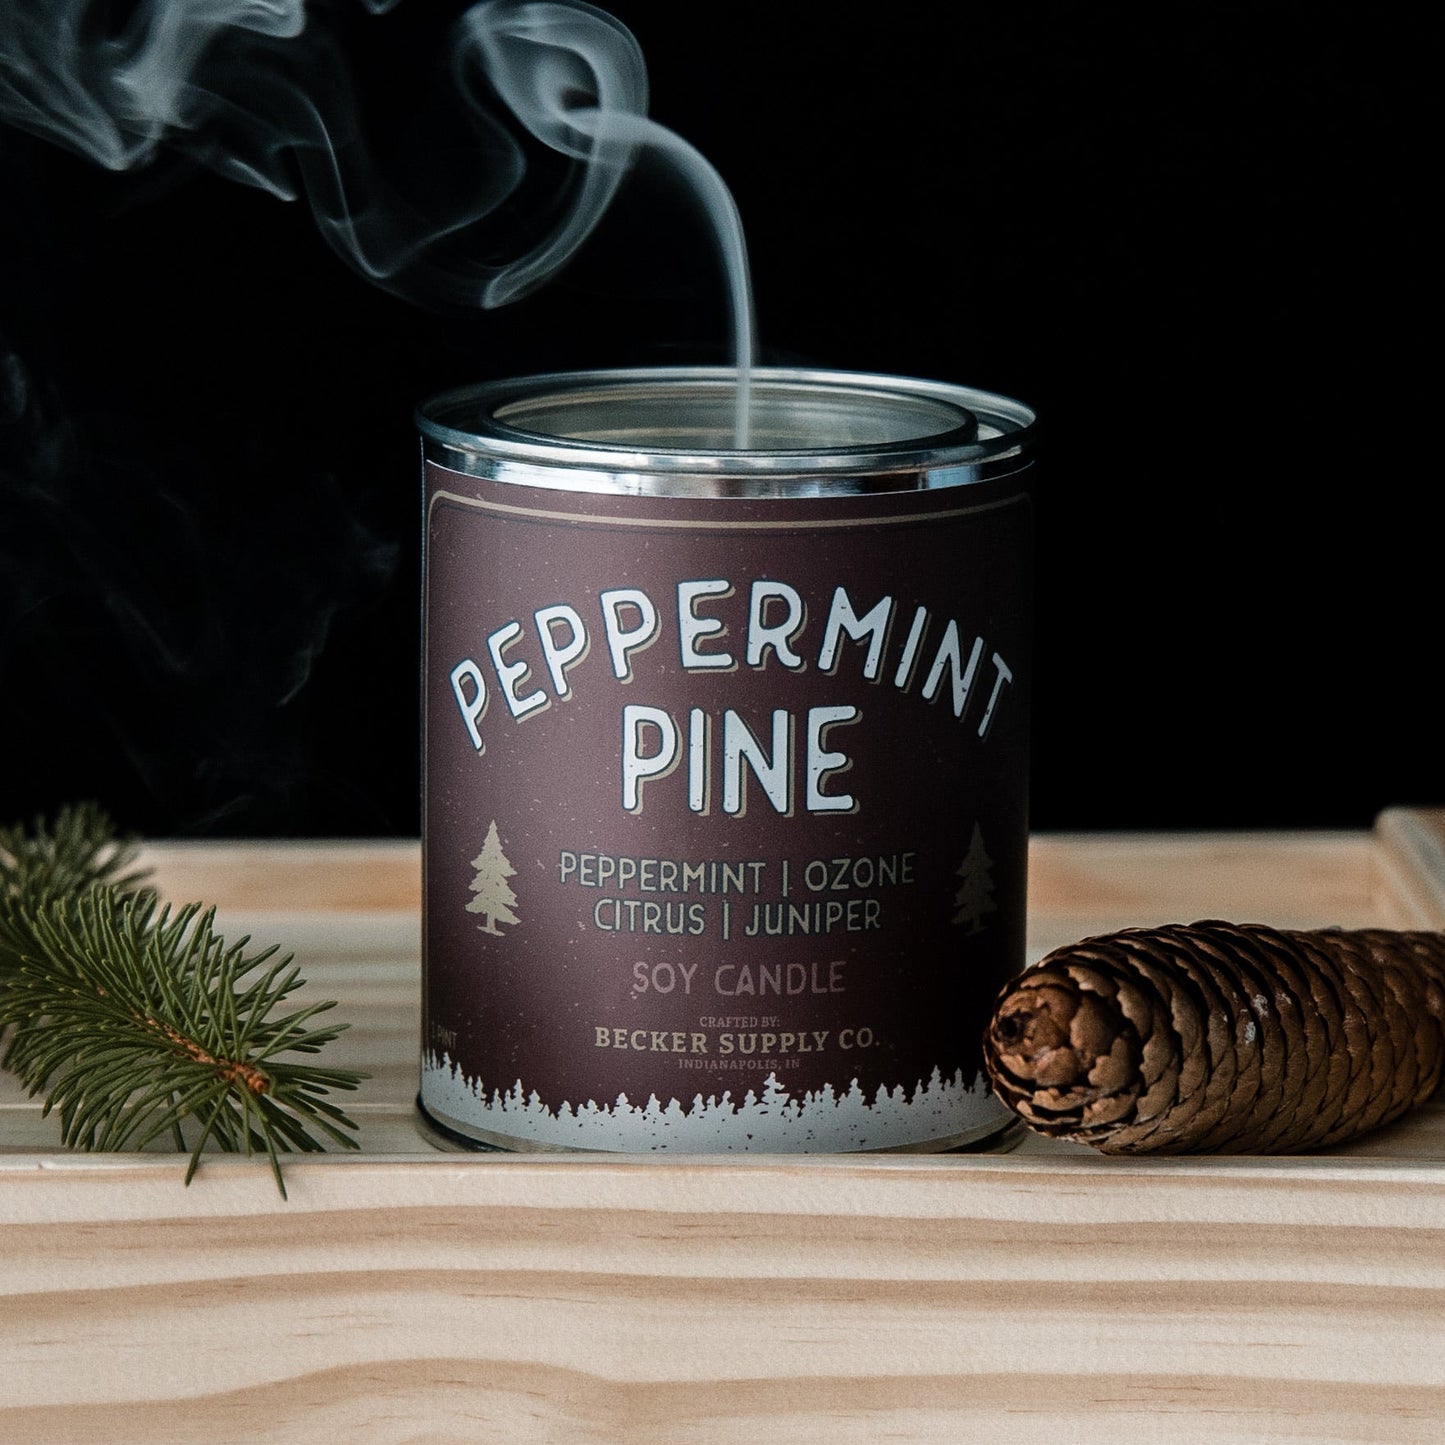 Peppermint Pine Candle - 1 Pint